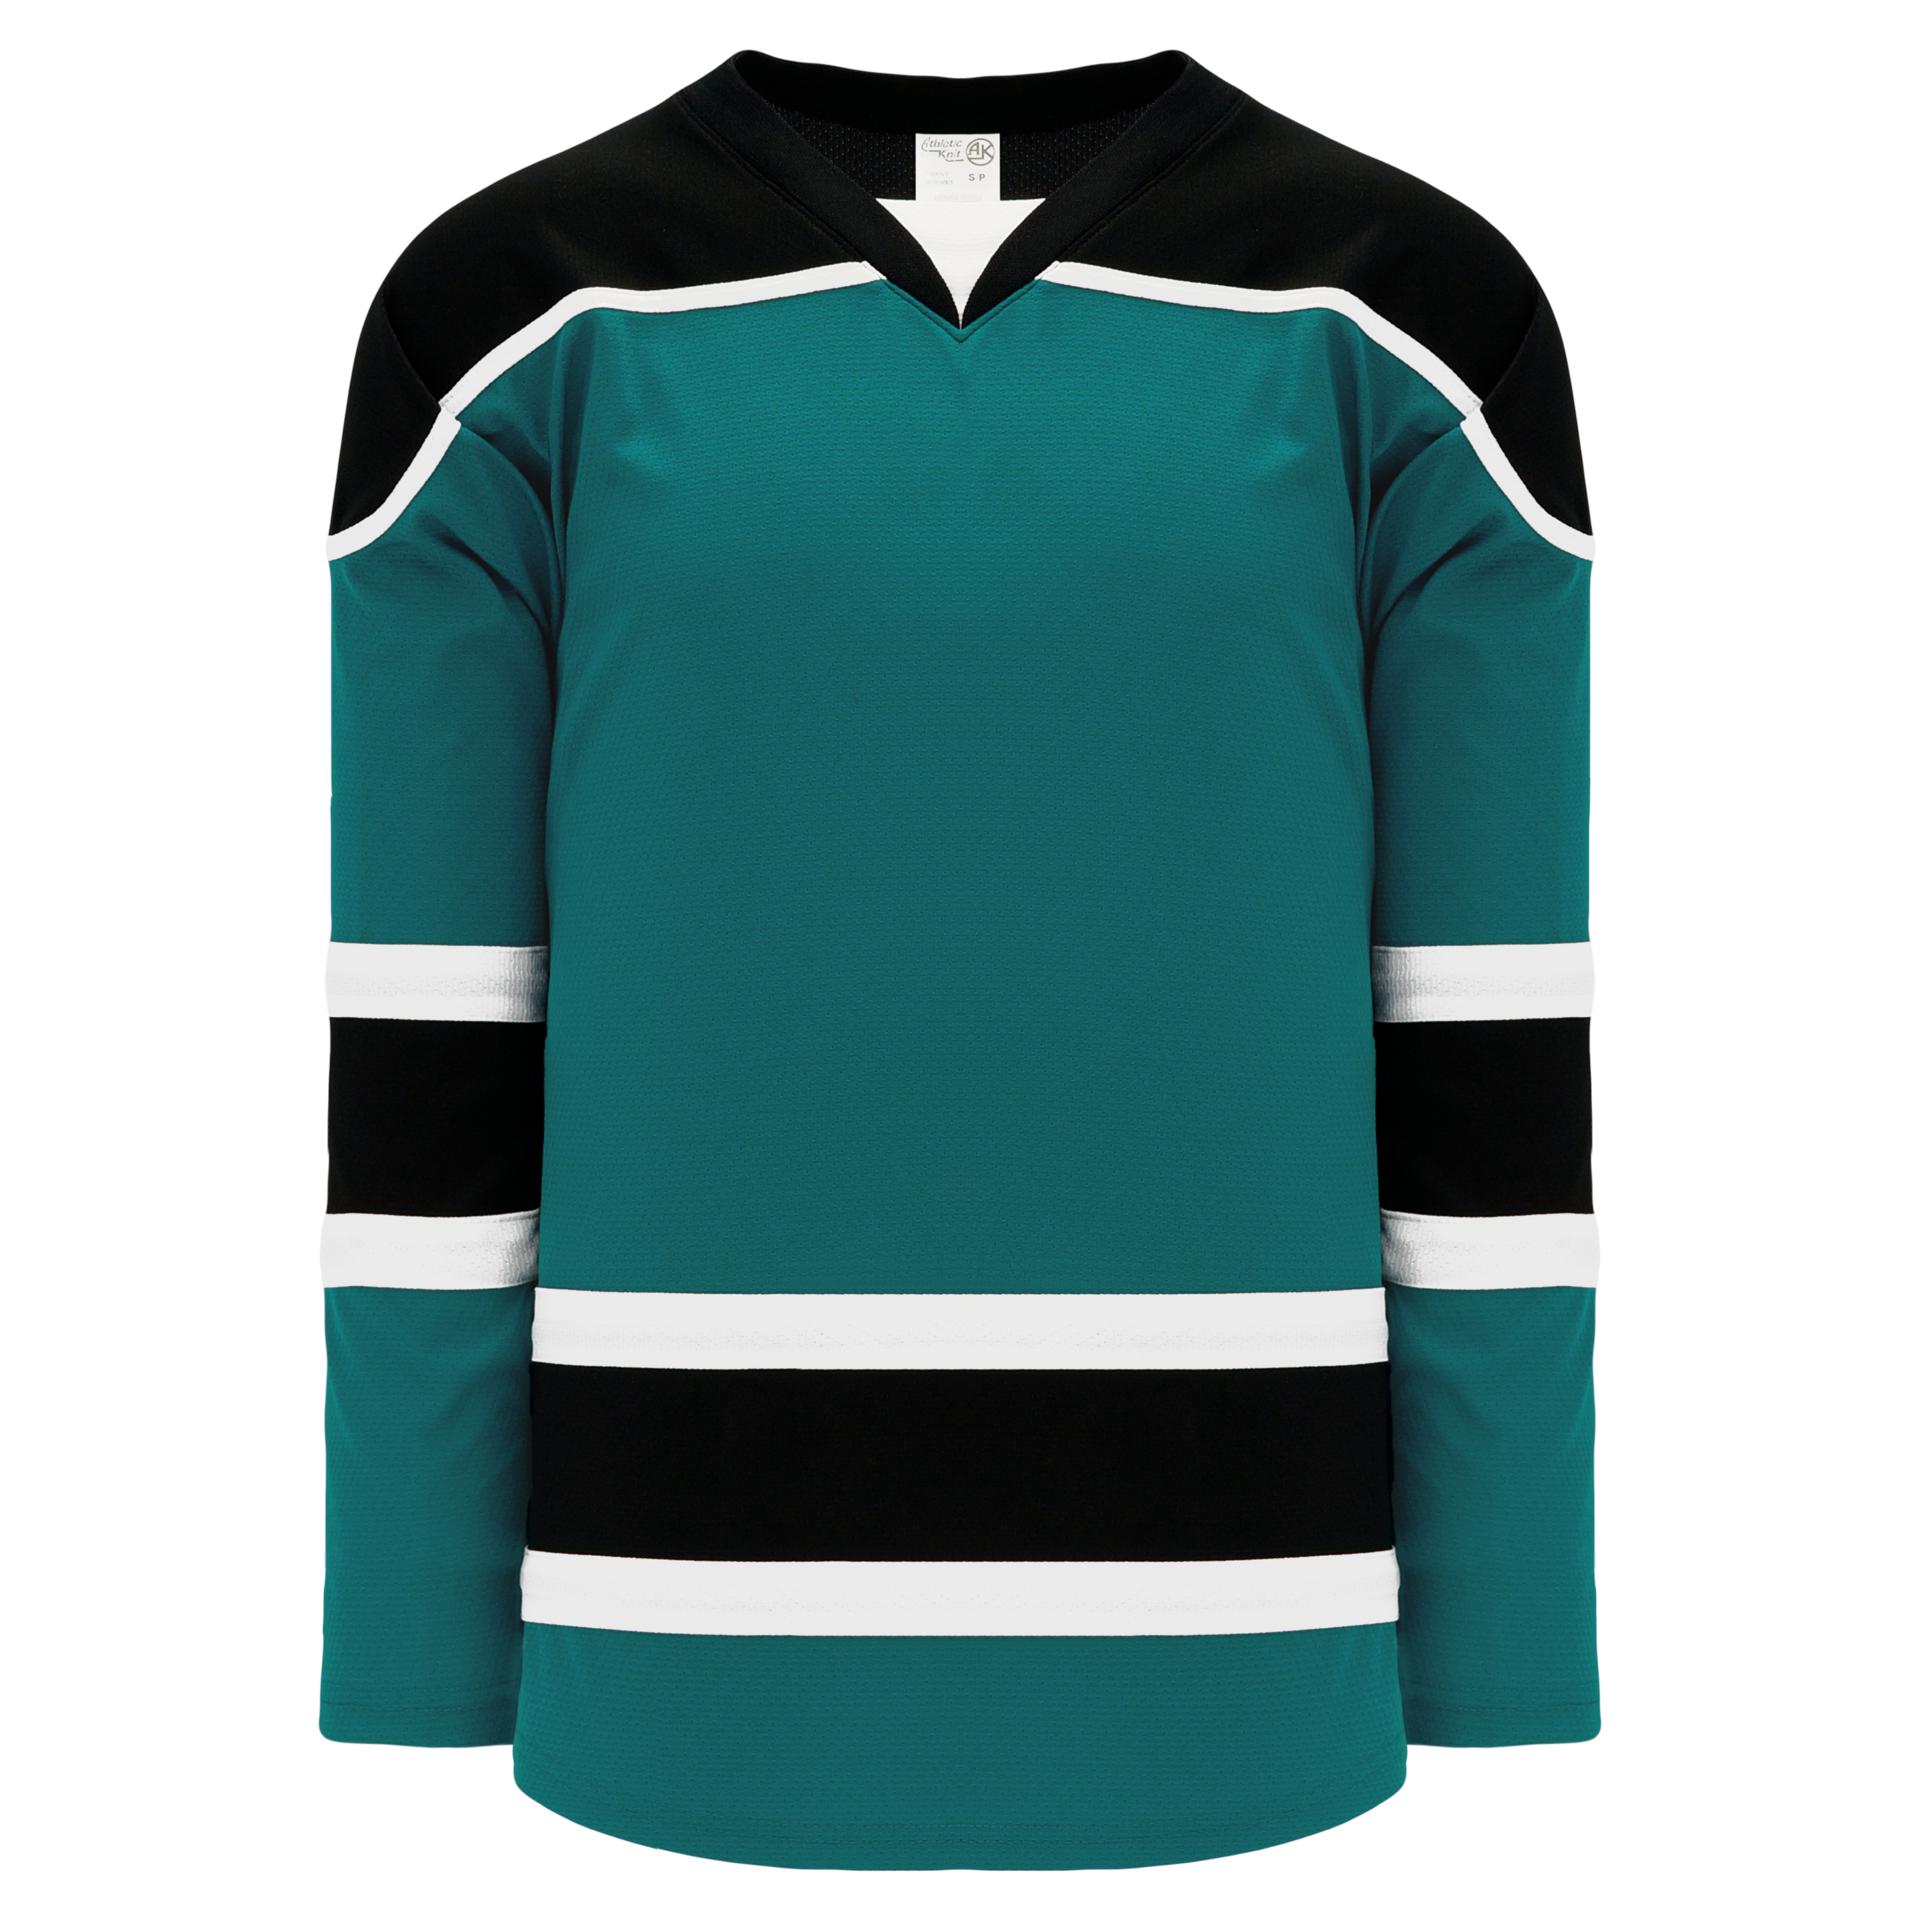 Athletic Knit Select Series Hockey Jersey, Sizes 2Xl-4Xl